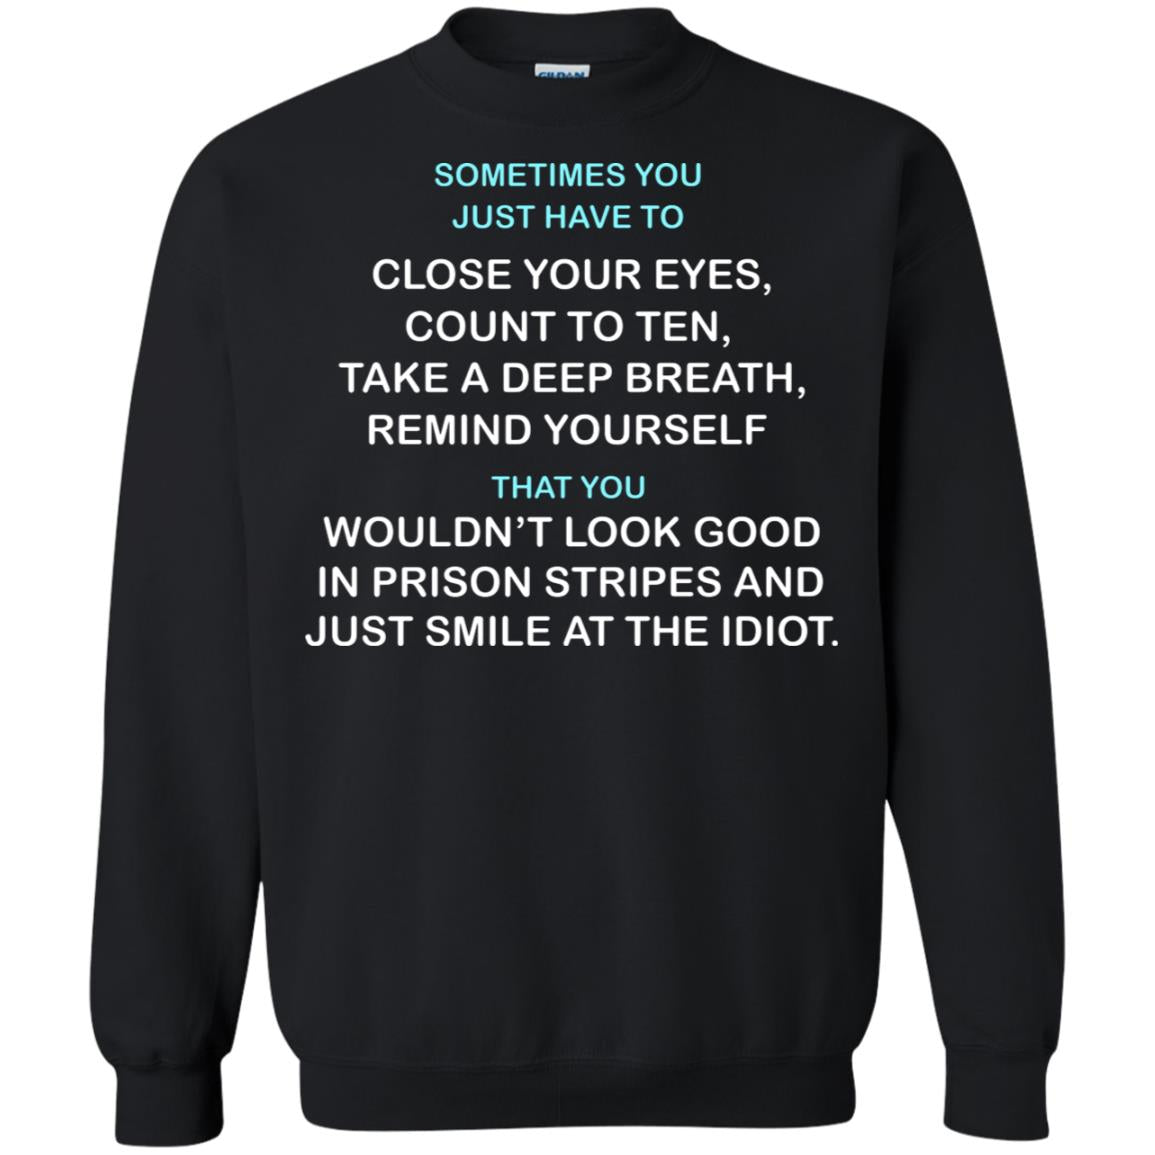 Sometimes You Just Have To Close Your Eyes Count To Ten Take A Deep Breath  Remind Yourself  That You Wouldn't Look Good In Prison Stripes And Just Smile At The IdiotG180 Gildan Crewneck Pullover Sweatshirt 8 oz.